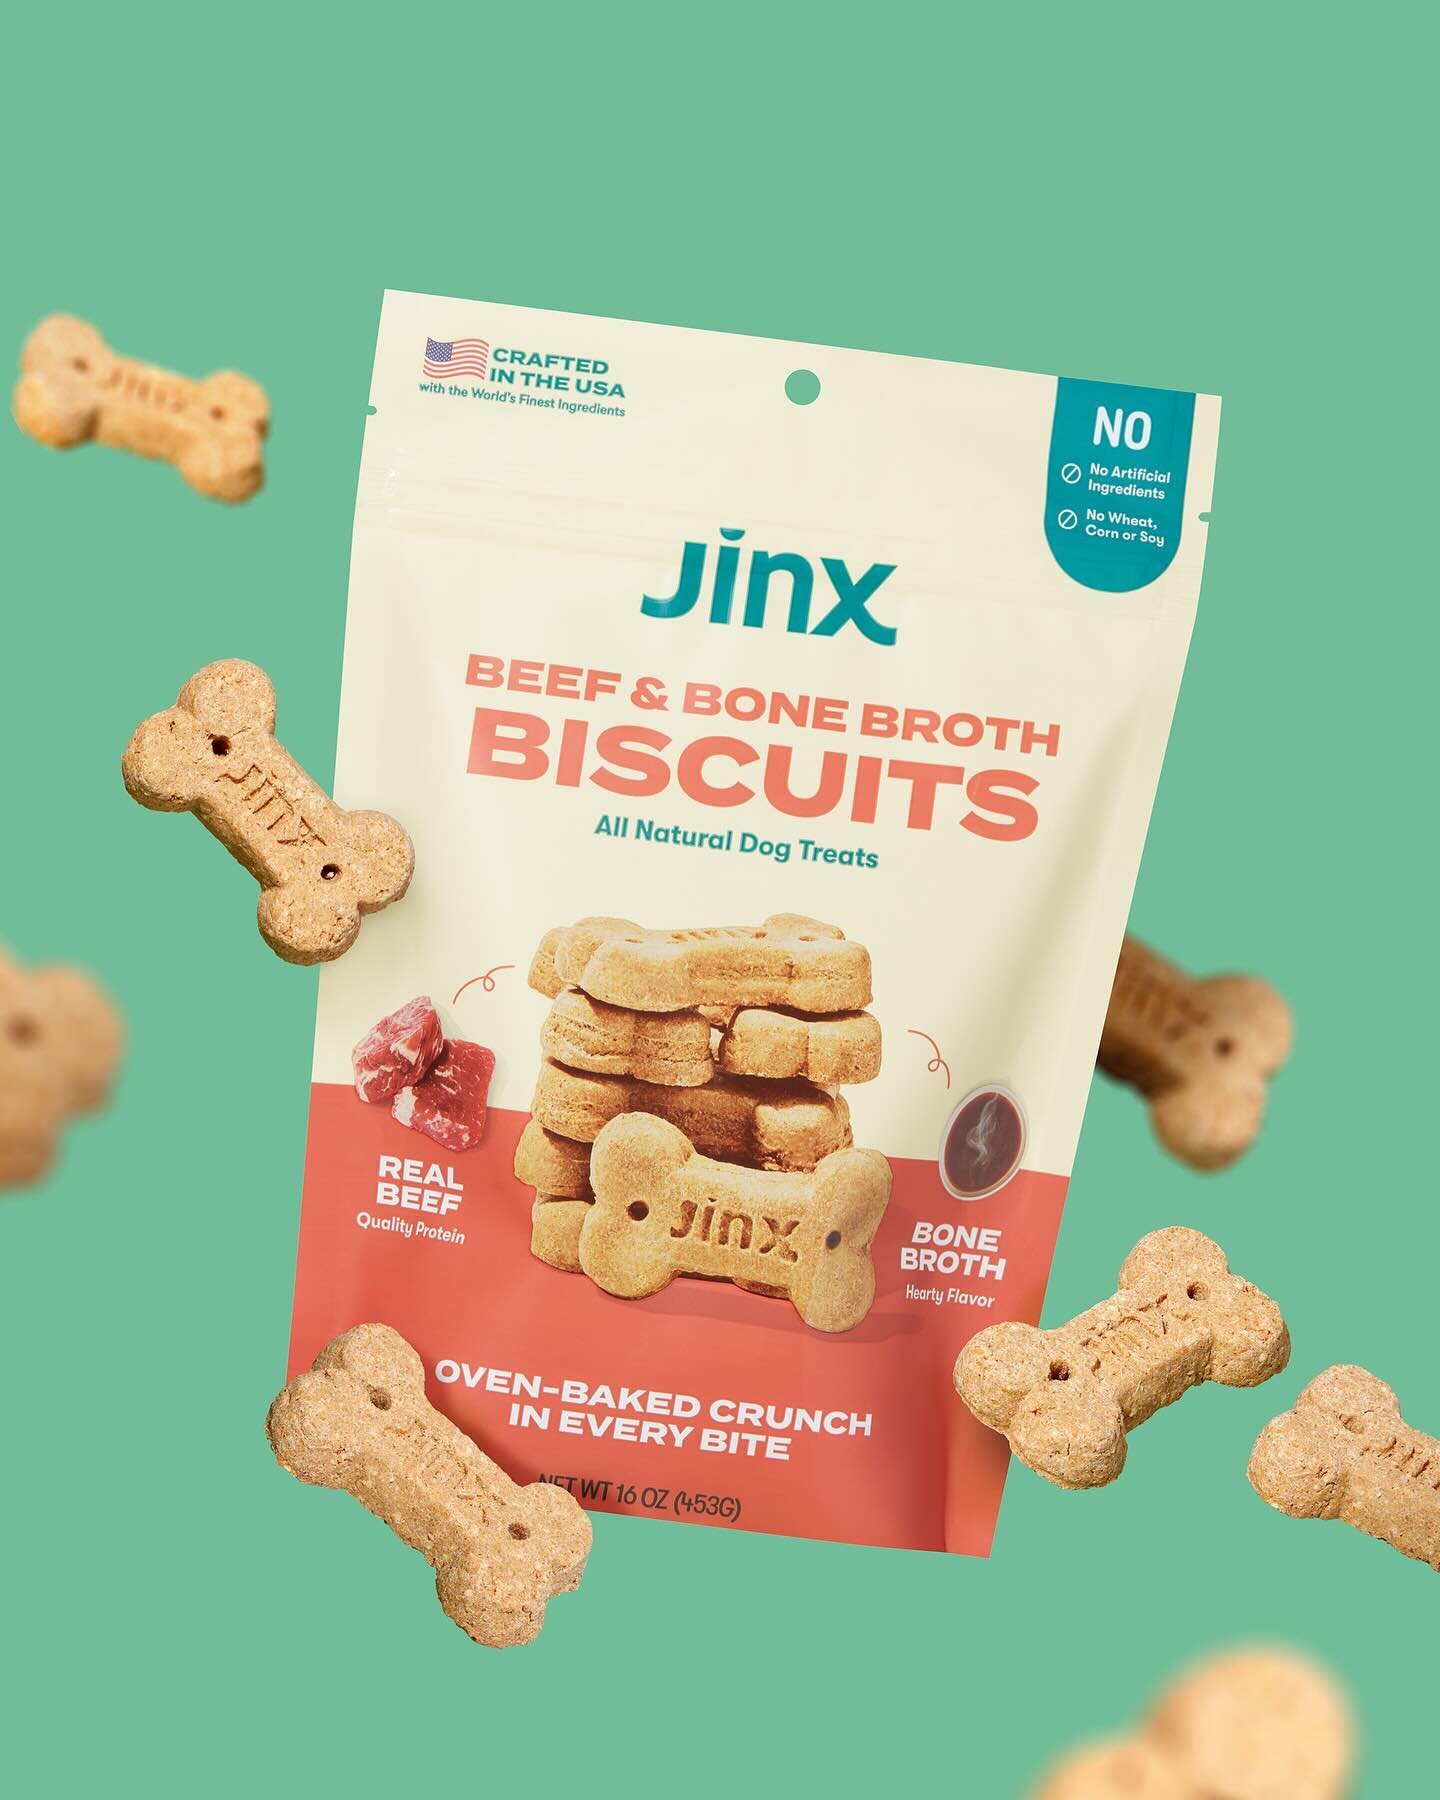 Elevating the pet treat game 😉 🐶 get it? lol 

Shot for @thinkjinx 

Photographer and creative director: Kailee Mandel
Producer: Dasha Khomenko
Creative director: Leigh Collins
Art director: Leah Eisenhauer
Light Assistant: Ryan Francoz
Styling: Eu